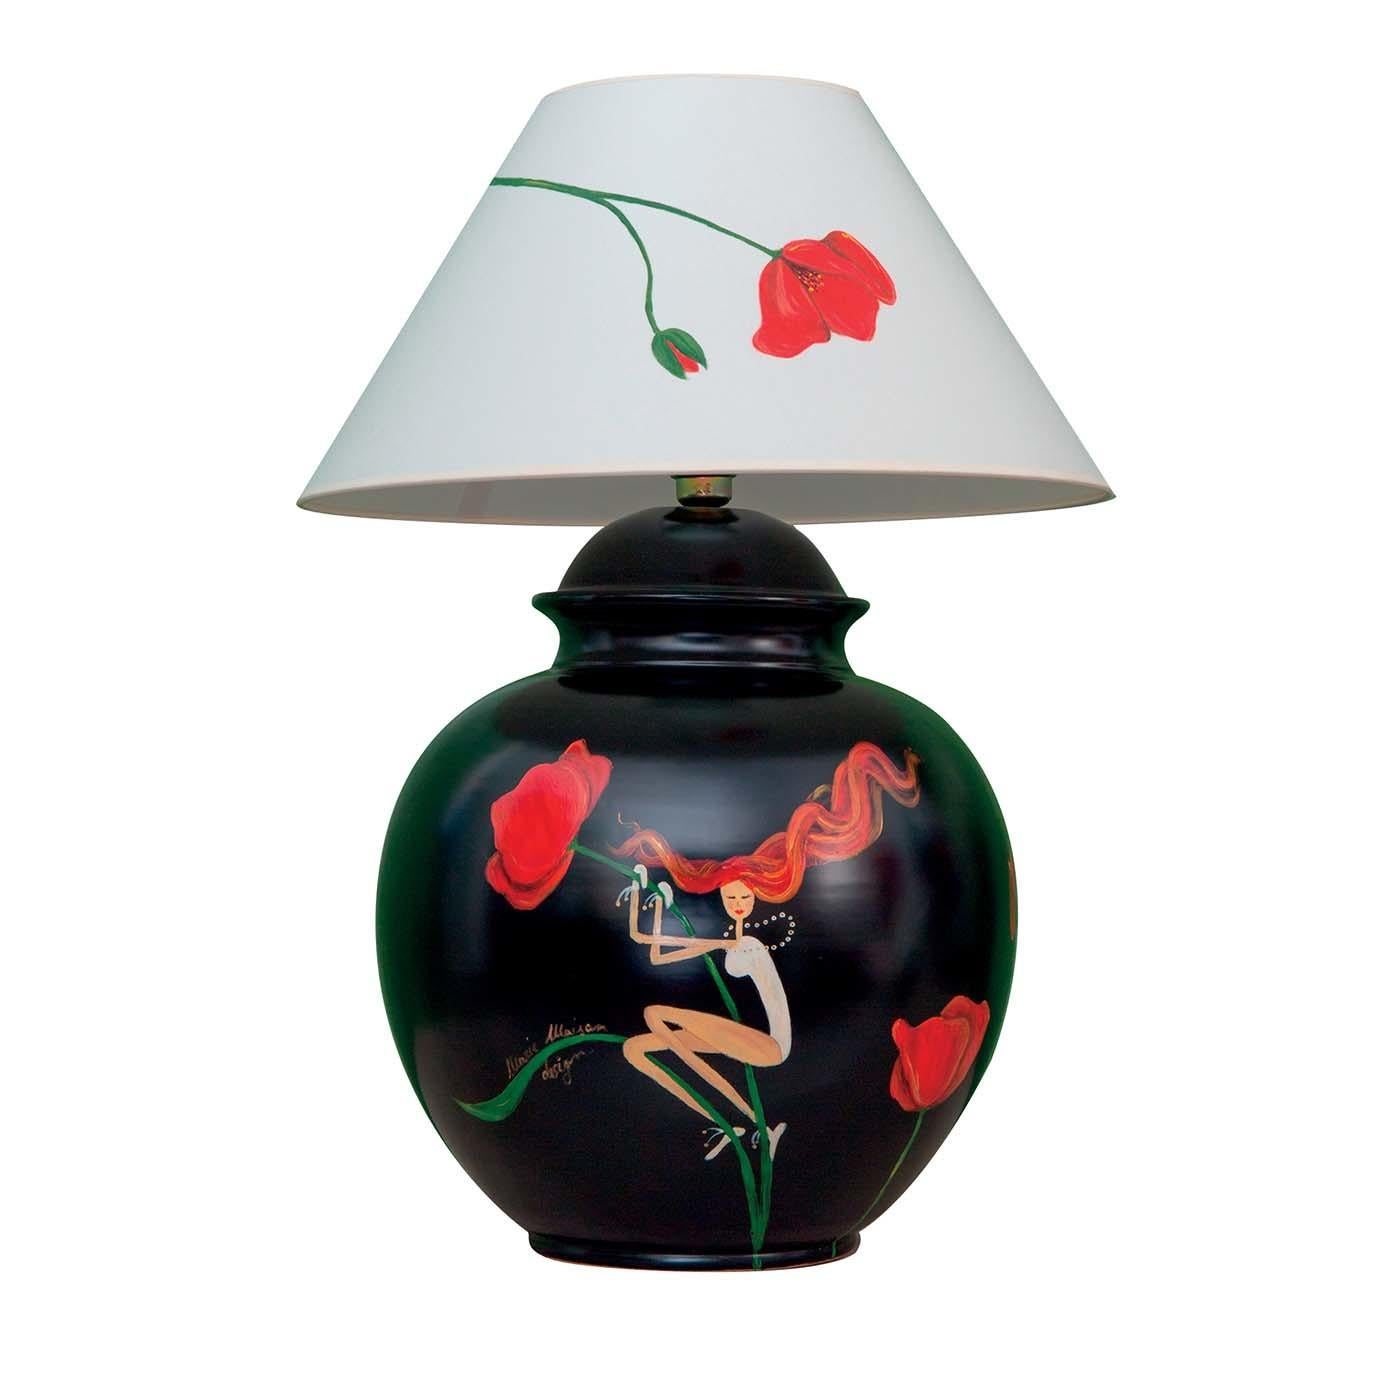 A stunning piece of traditional craftsmanship, this table lamp features a rounded base made of black-lacquered clay, and a lampshade fashioned of white fabric and embellished with graceful poppy flowers. Entirely painted by hand, the piece boasts